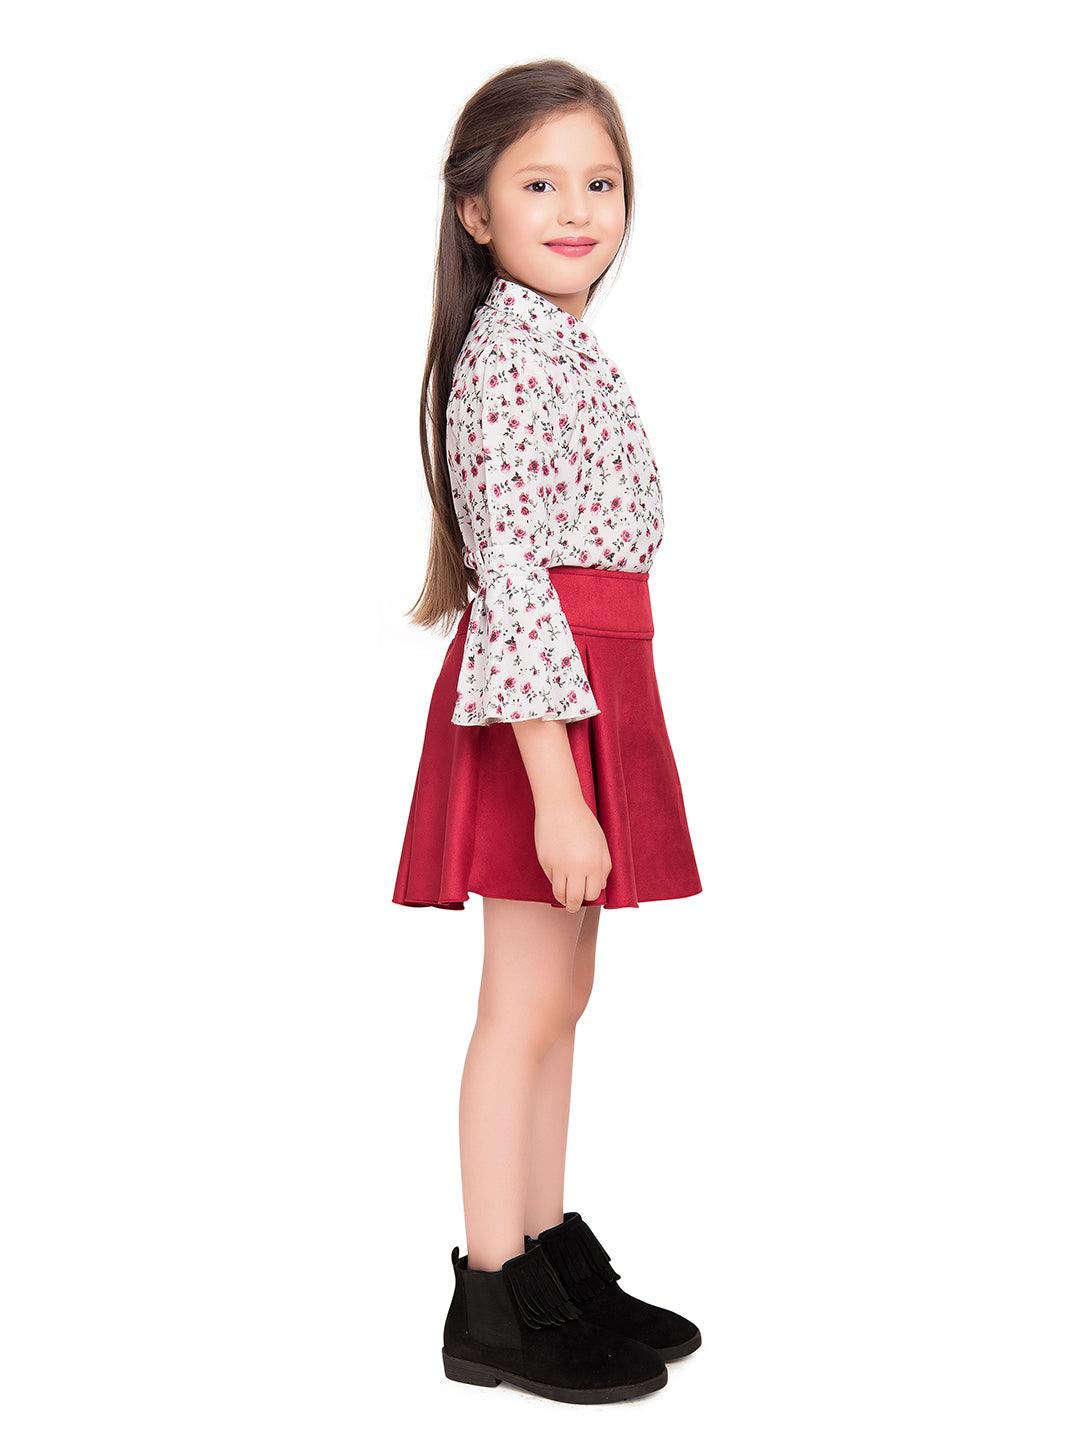 Tiny Baby Cherry Colored Skirt Set - 2040 - TINY BABY INDIA shop.tinybaby.in